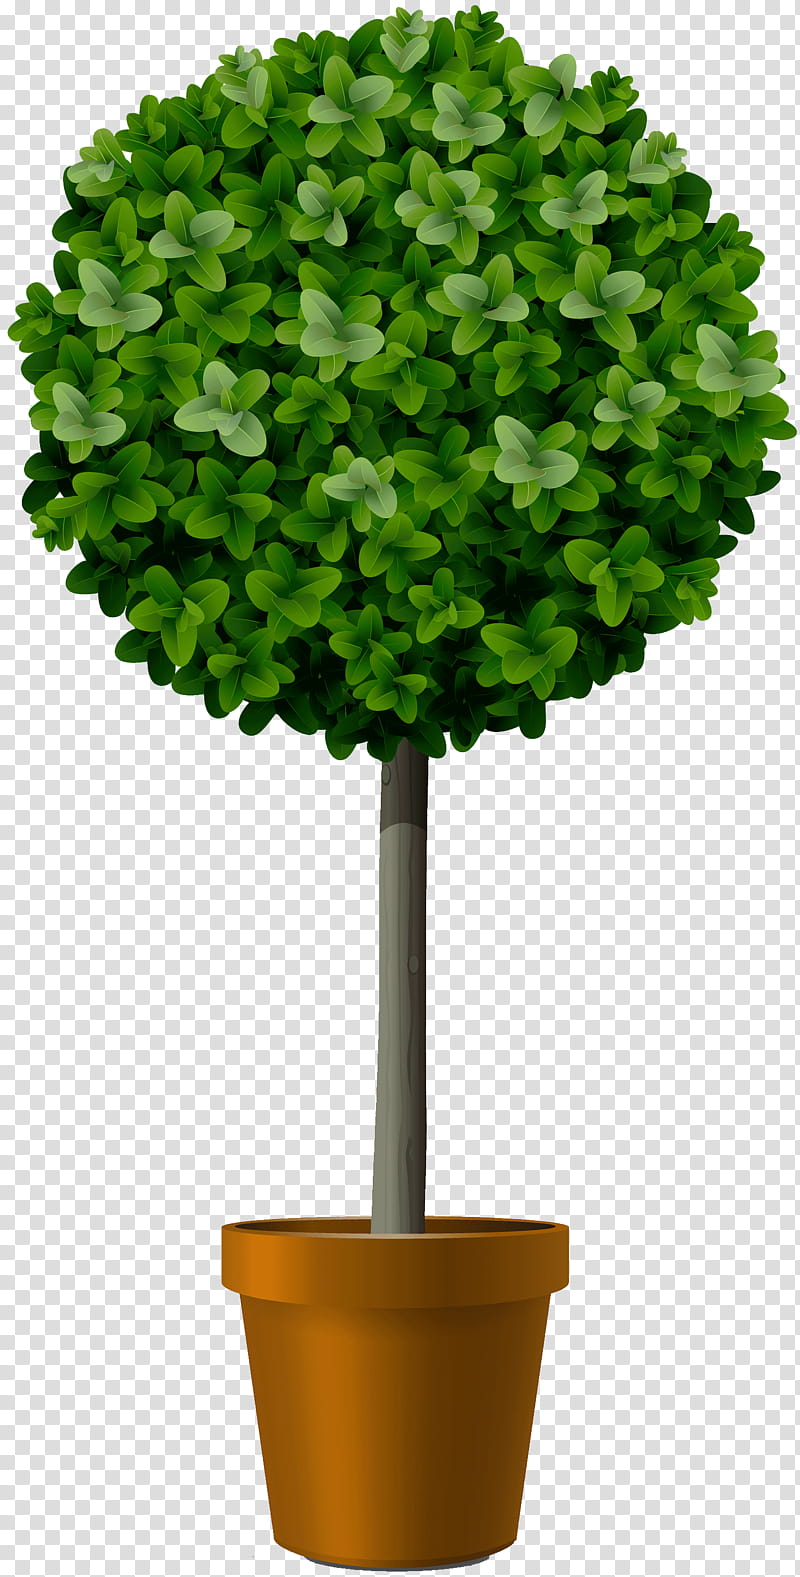 Green Grass, Tree, Topiary, Shrub, Box, Flowerpot, Leaf, Plant transparent background PNG clipart